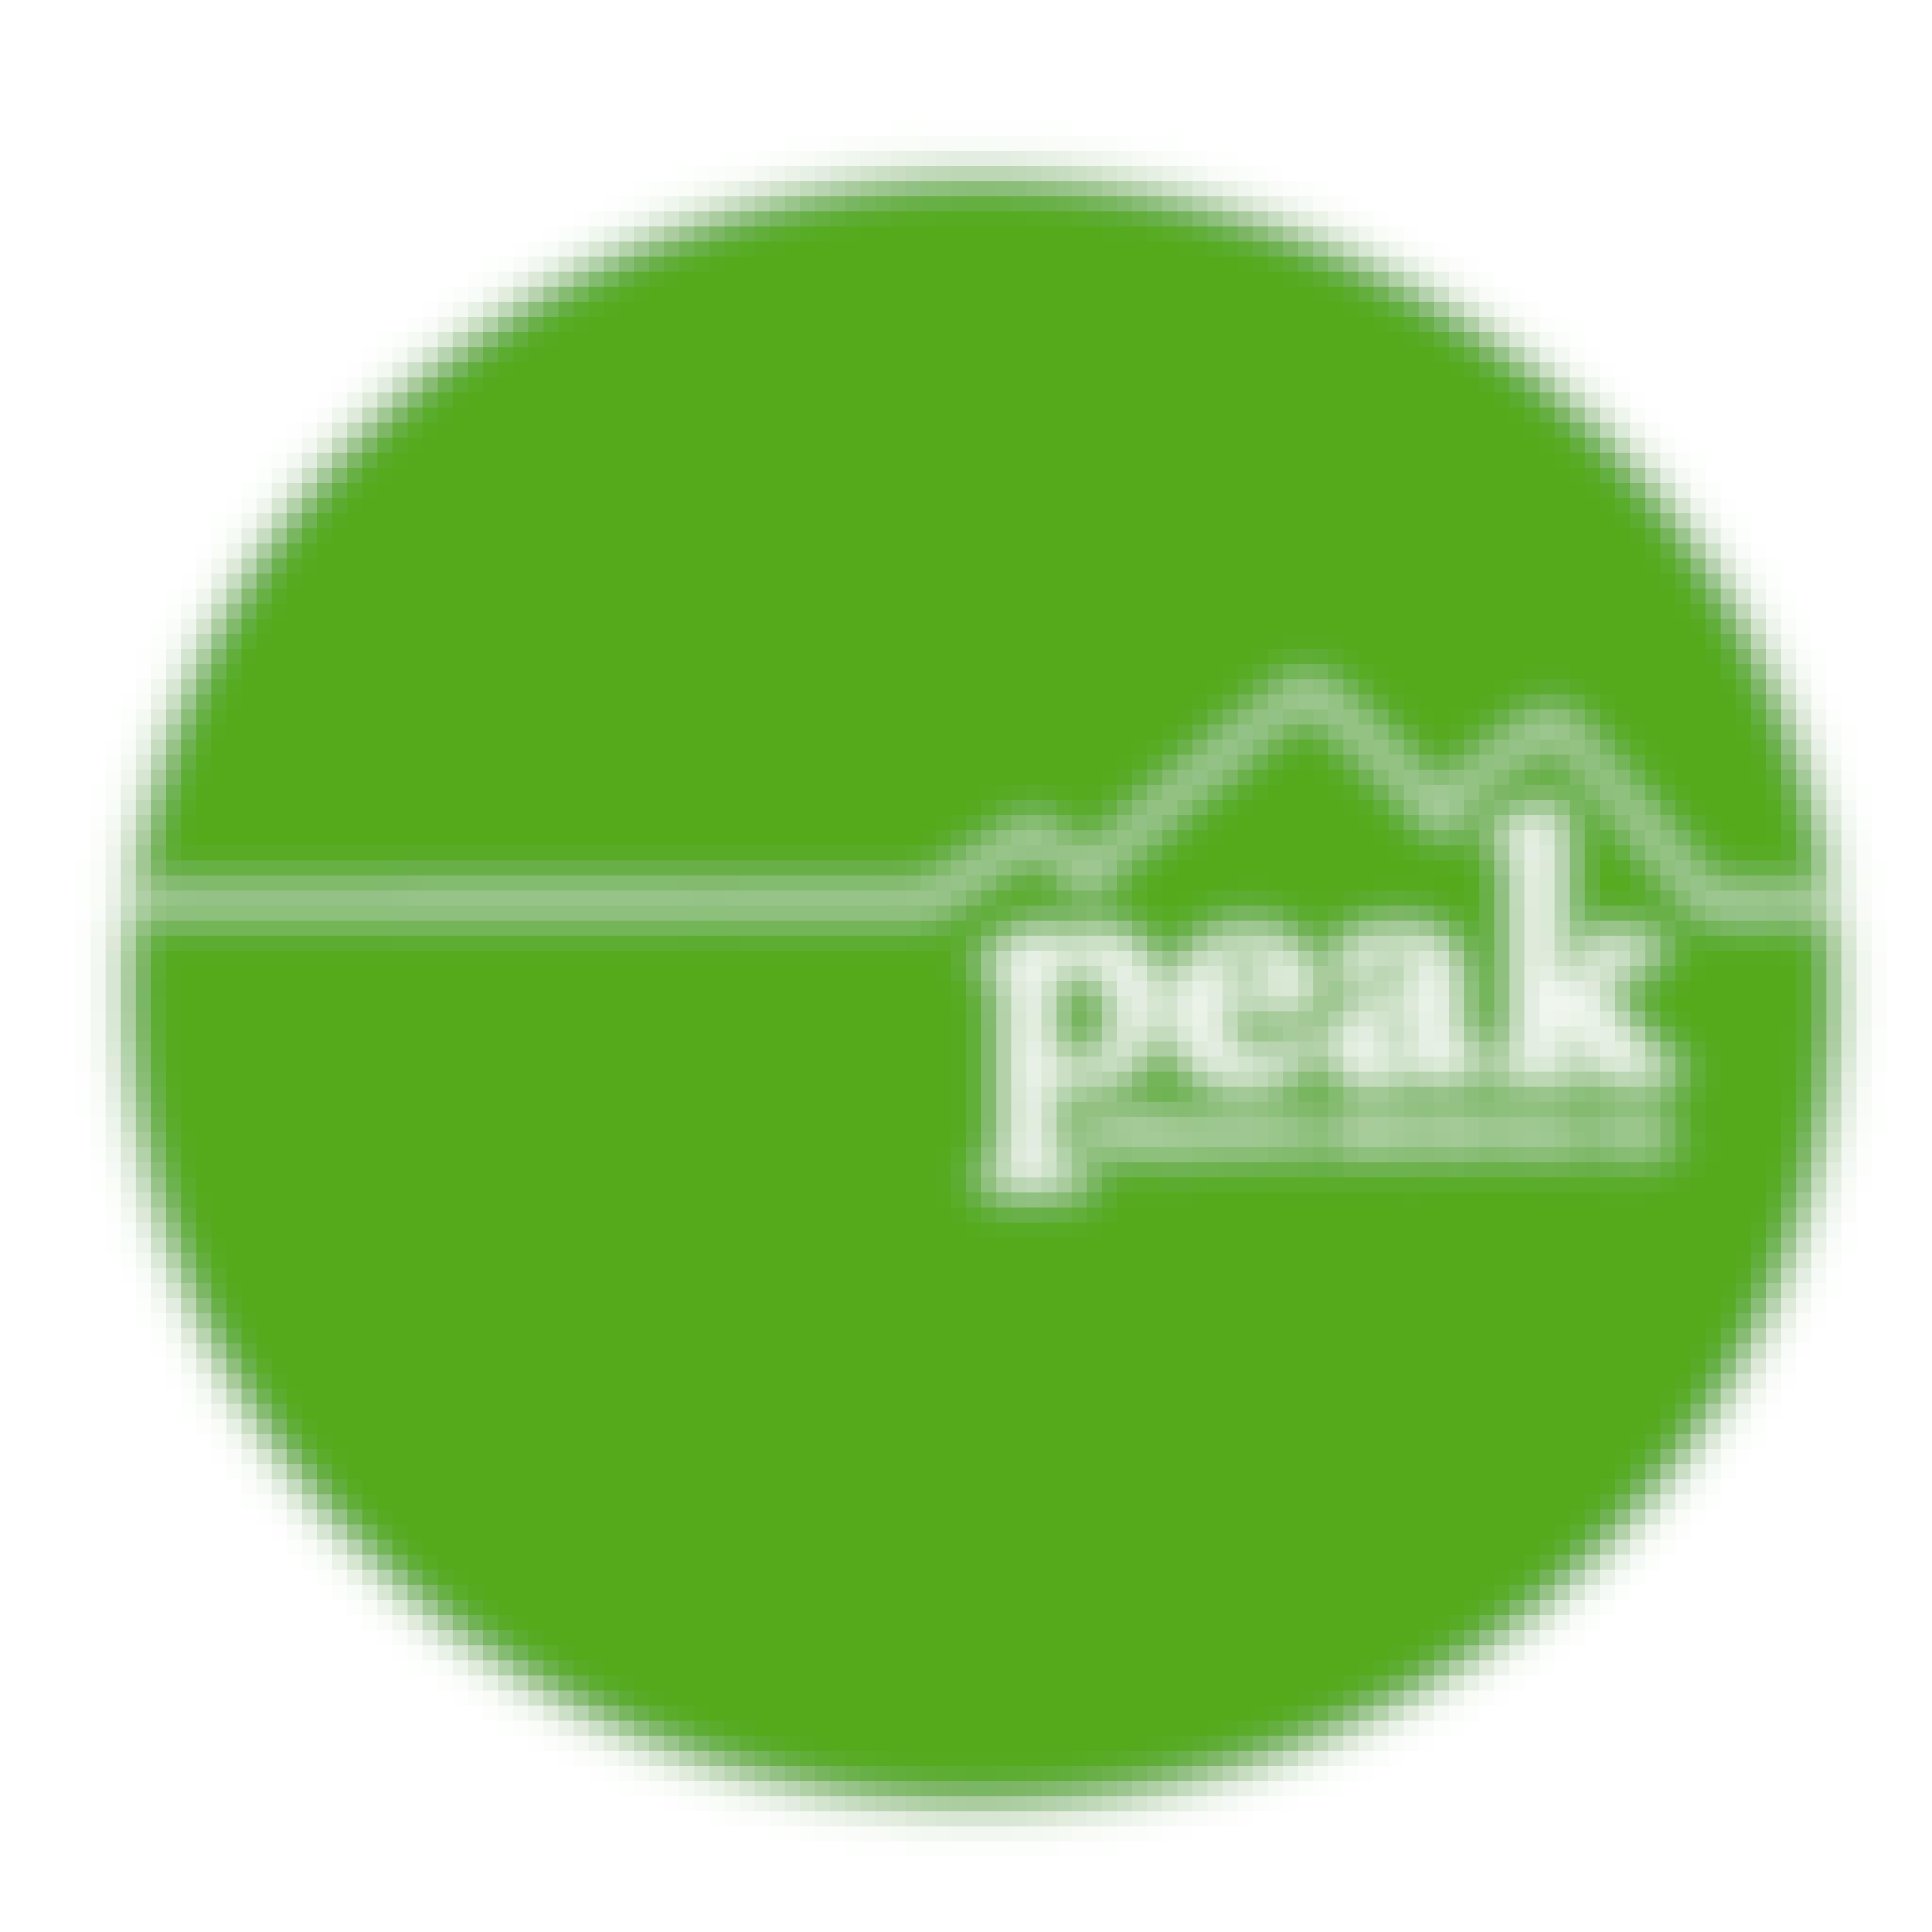 Peak Organic Brewing Company Snack Pack 12 pack 12 oz. Can